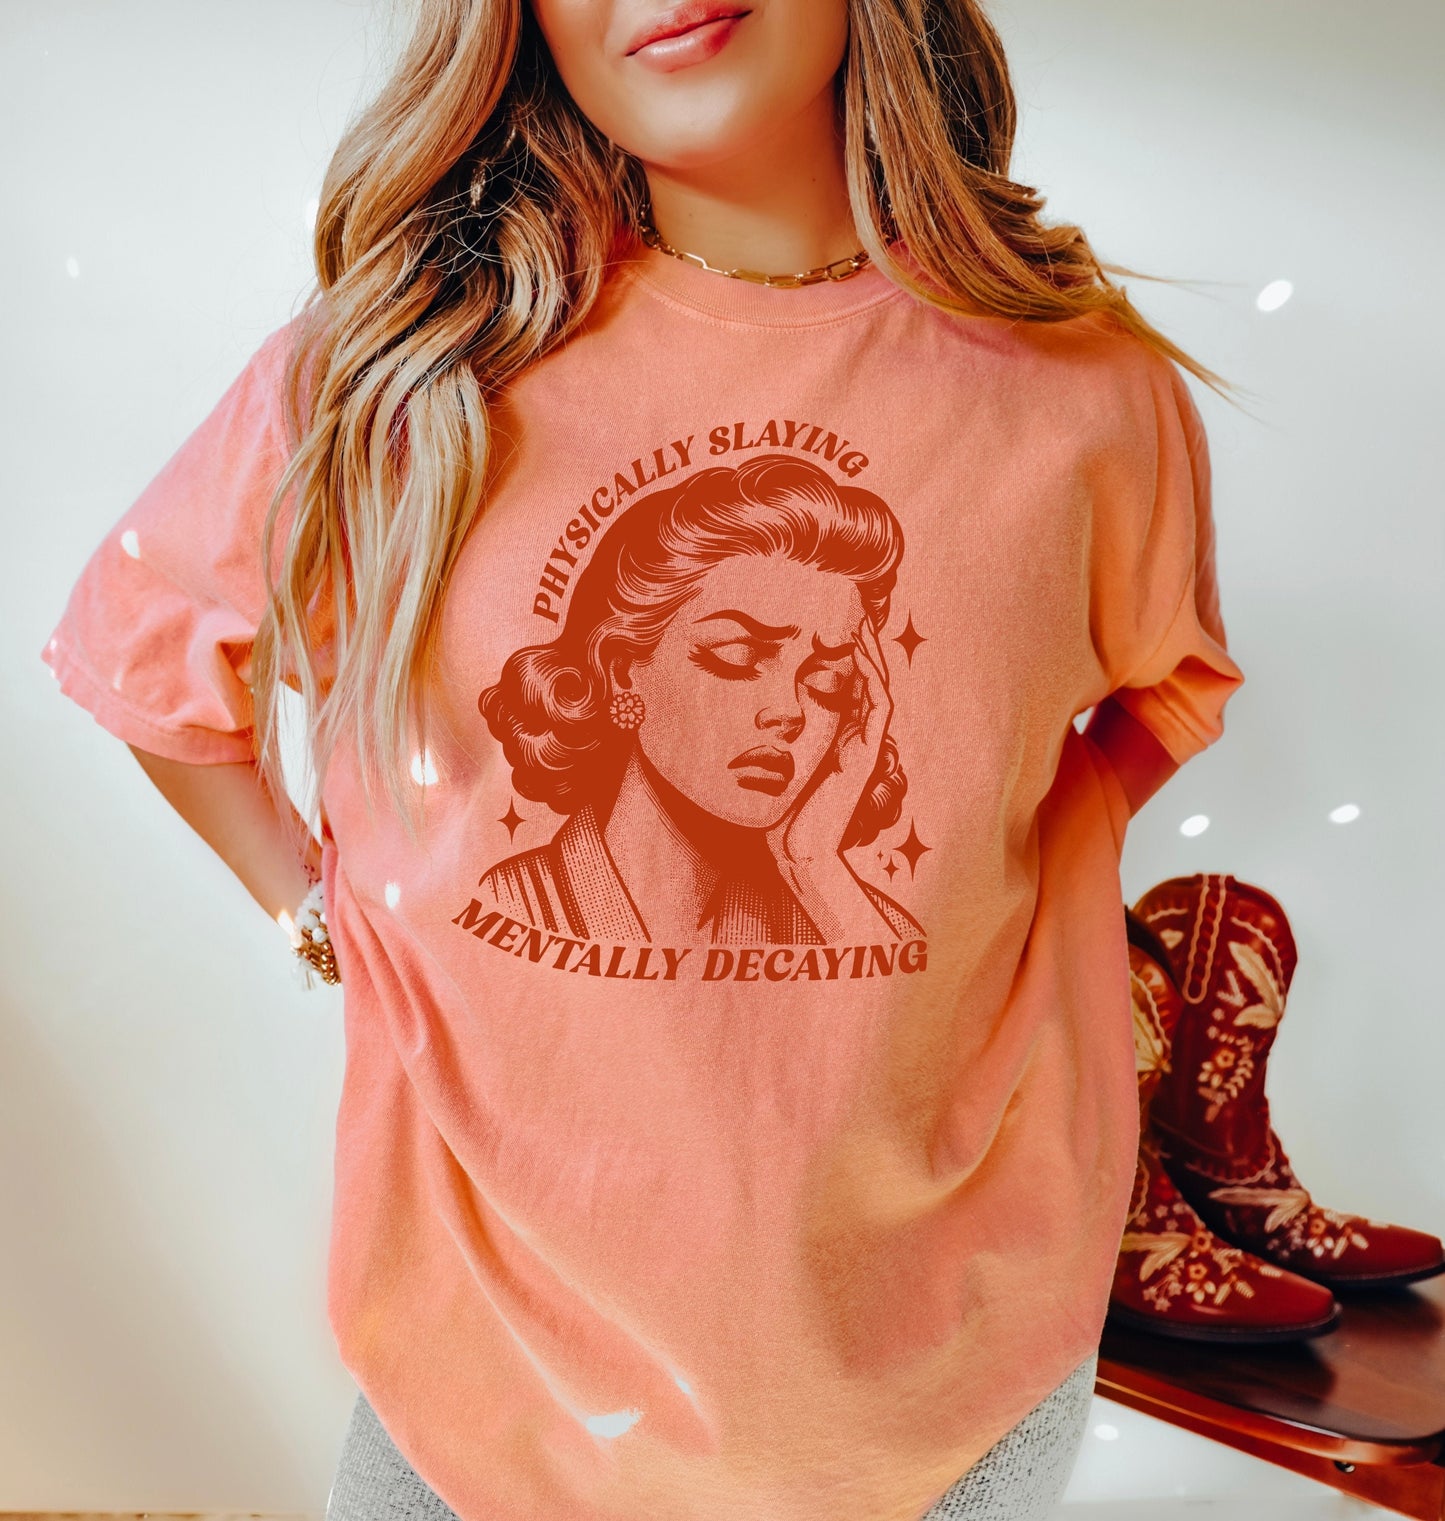 Physically Slaying Mentally Decaying Shirt, Oversized Shirt, Retro Housewife, Funny Sarcastic Adult Humor, Trendy Tee, Comfort Colors Shirt